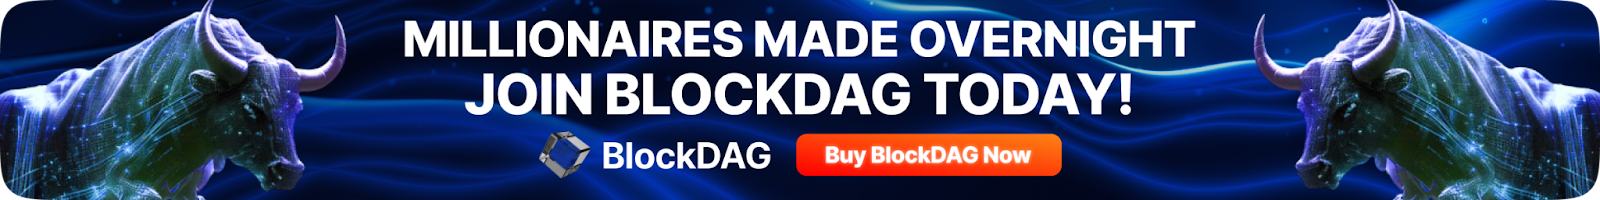 BlockDAG Dominates Global Altcoin Market, Outshining Ethereum and Kaspa with $38.3M Presale